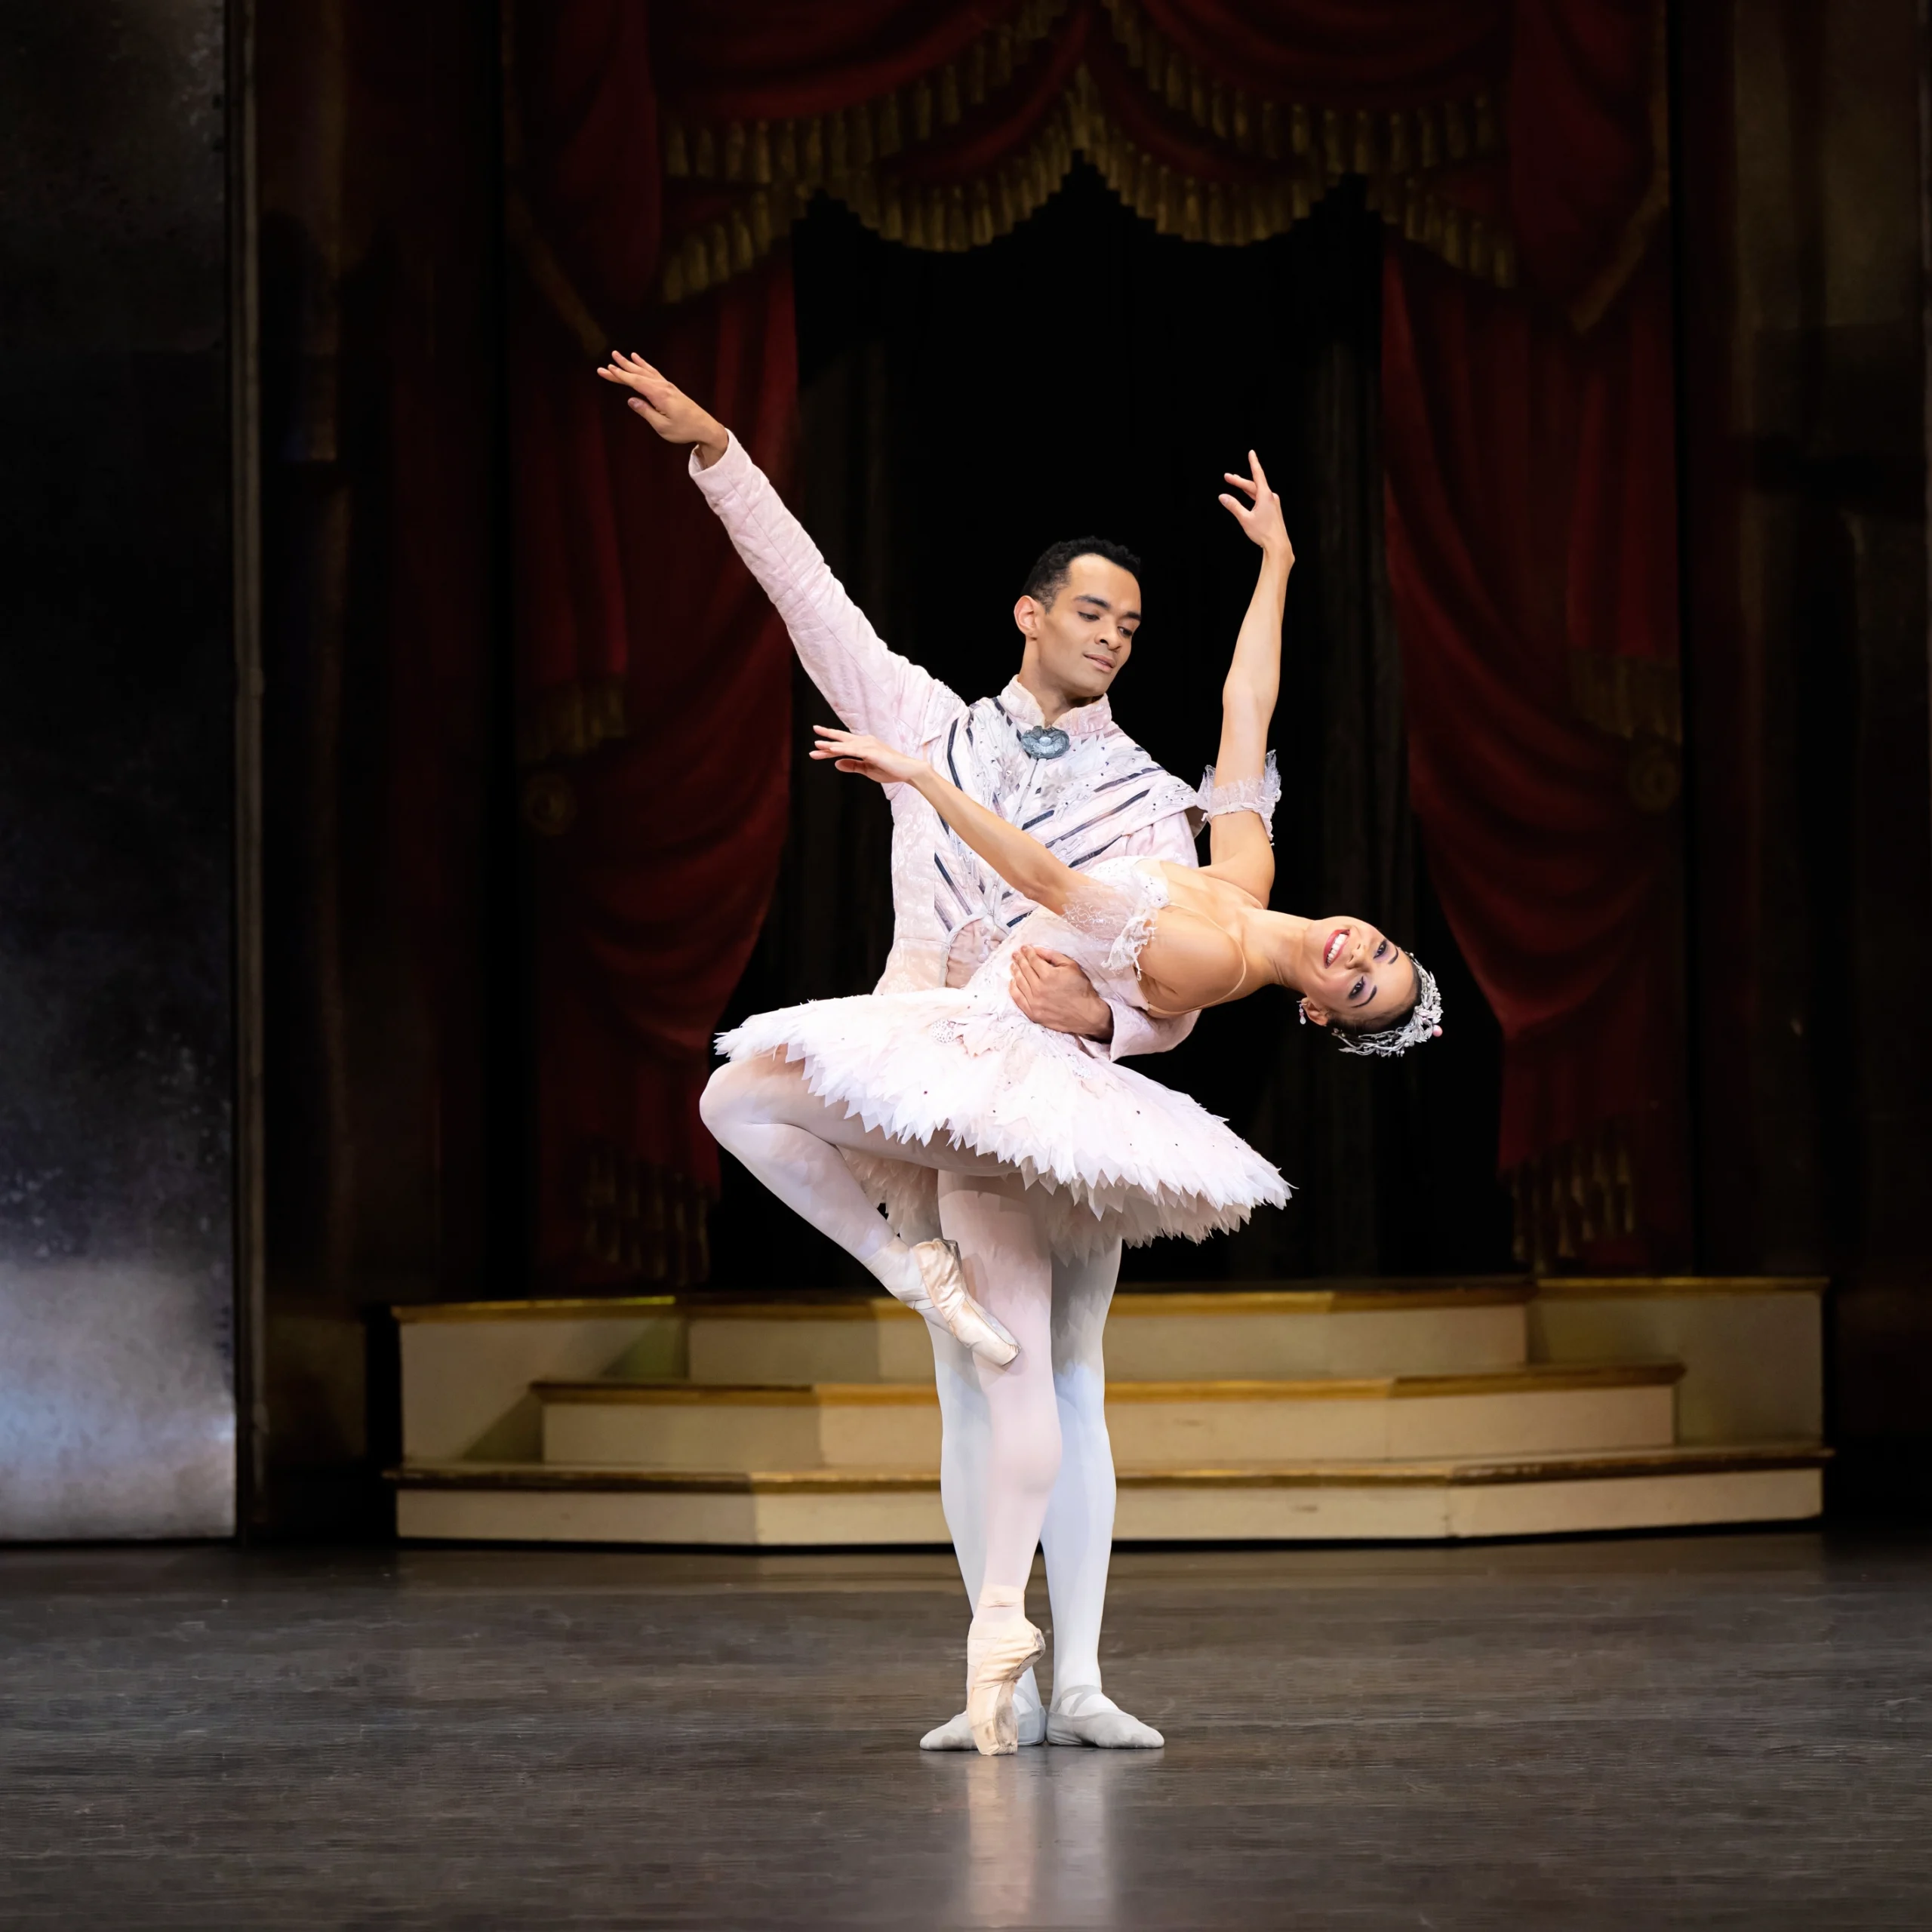 Céline Gittens and Brandon Lawrence perform a pas de deux during a performance of the Nutcracker. Gittens stands on pointe facing stage right with her left leg in a parallel passé, leaning back deeply as Lawrence stands behind her and holds her waist. Gittens wears a light pink tutu, pink tights and pointe shoes and a silvery crown and holds her arms in third position, looking out to the audience with a broad smile. Lawrence, in a light pink and silver tunic, white tights and white ballet slippers, looks down at her affectionately and lifts his right arm up.